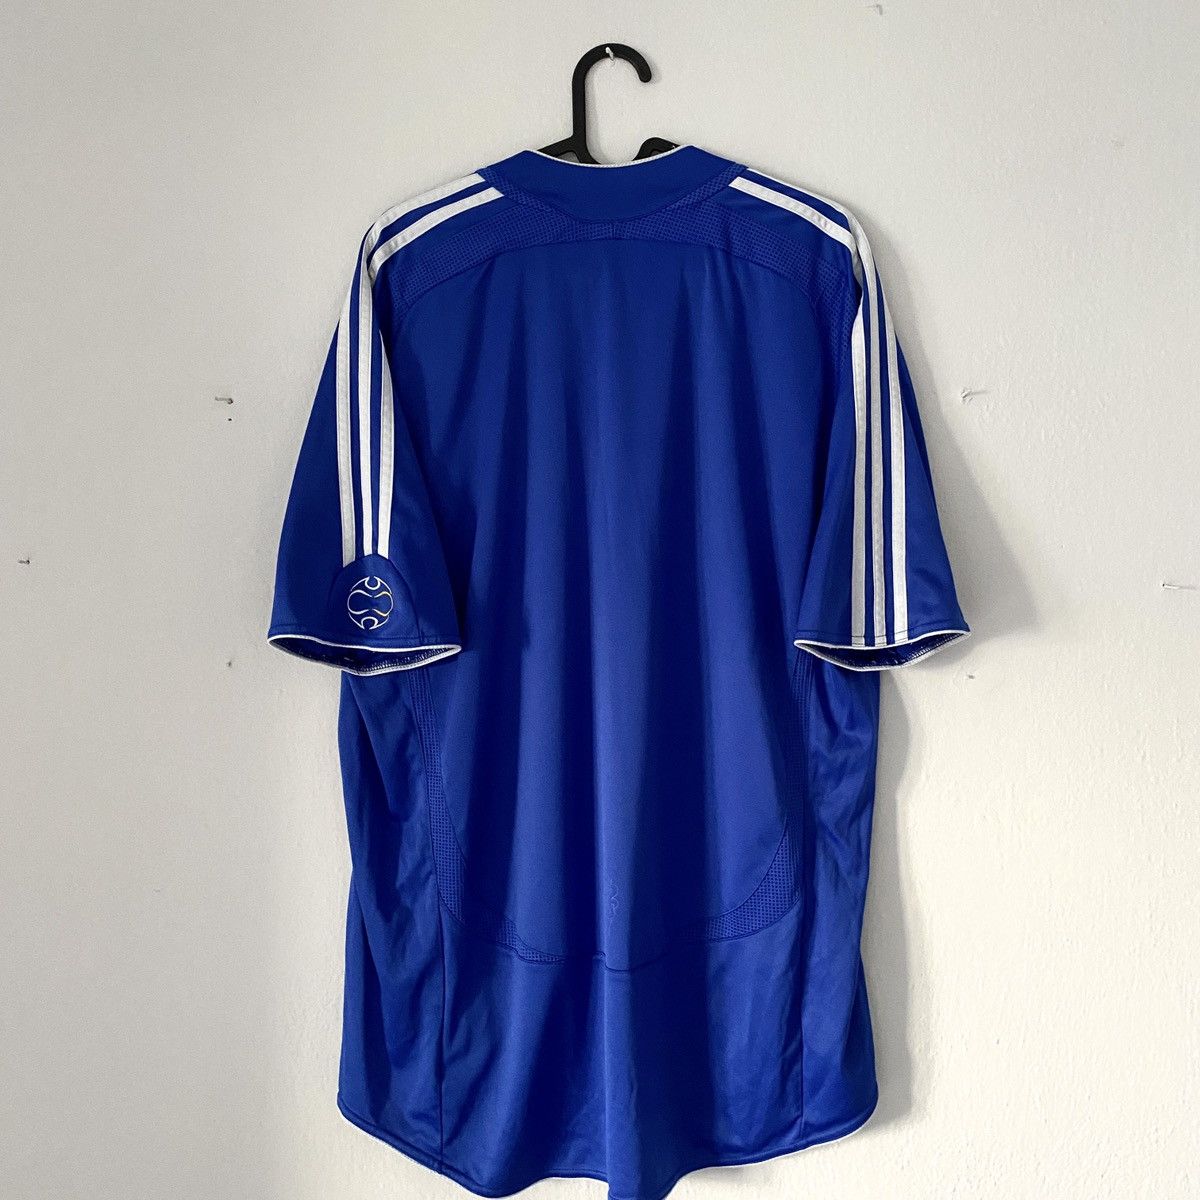 Adidas 2006 2007 Chelsea London Adidas Vintage Home Soccer Jersey Size US L / EU 52-54 / 3 - 6 Preview